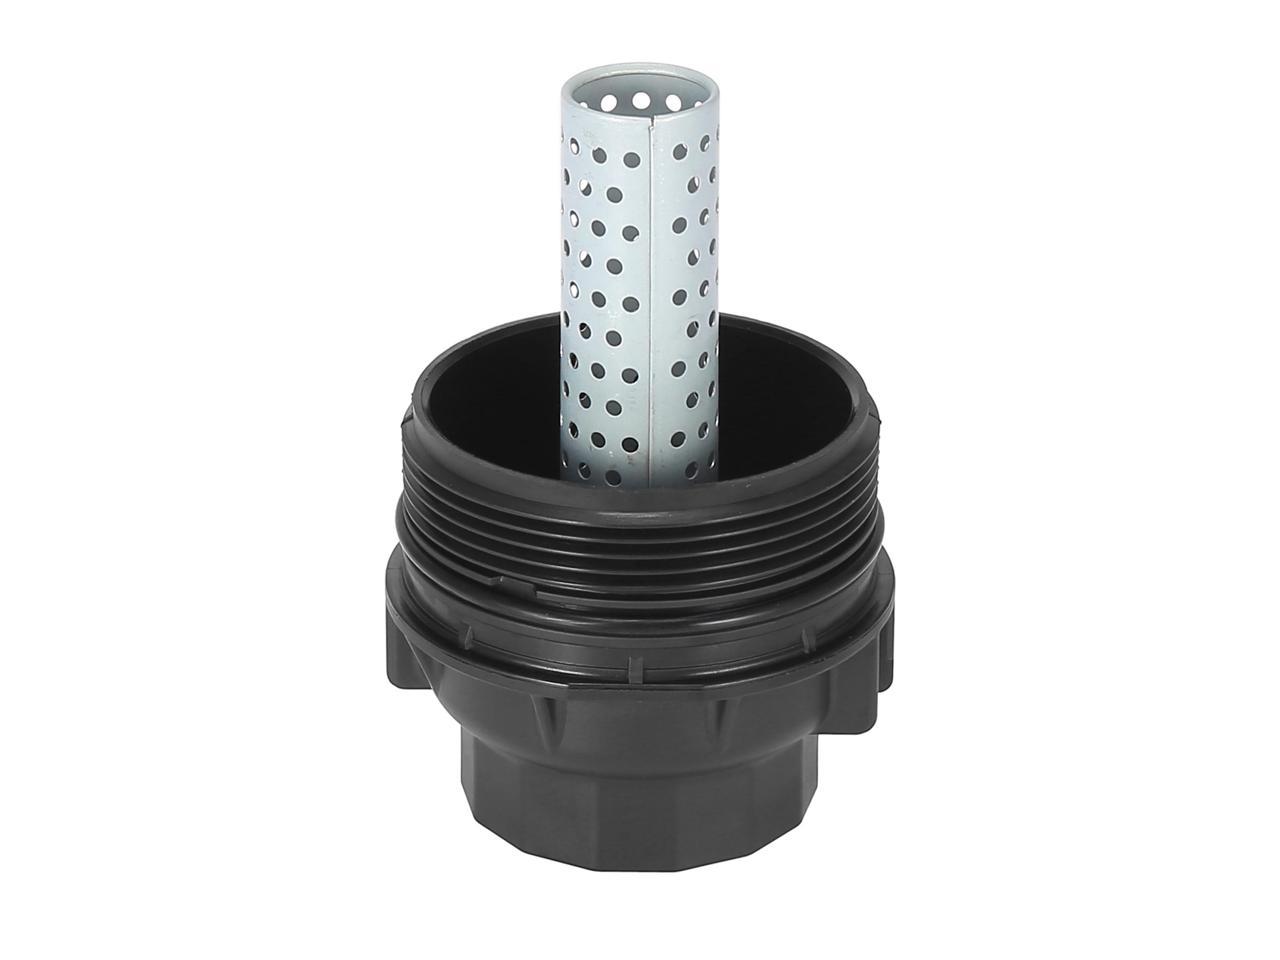 15643-31050 Compatible with Toyota 15620-38010 Oil Filter Housing Cap Assembly with Oil Plug 2007-2013 Tundra 2008-2011 LX570 Replace 15620-0S010 2008-2020 Sequoia 2008-2020 Land Cruiser 